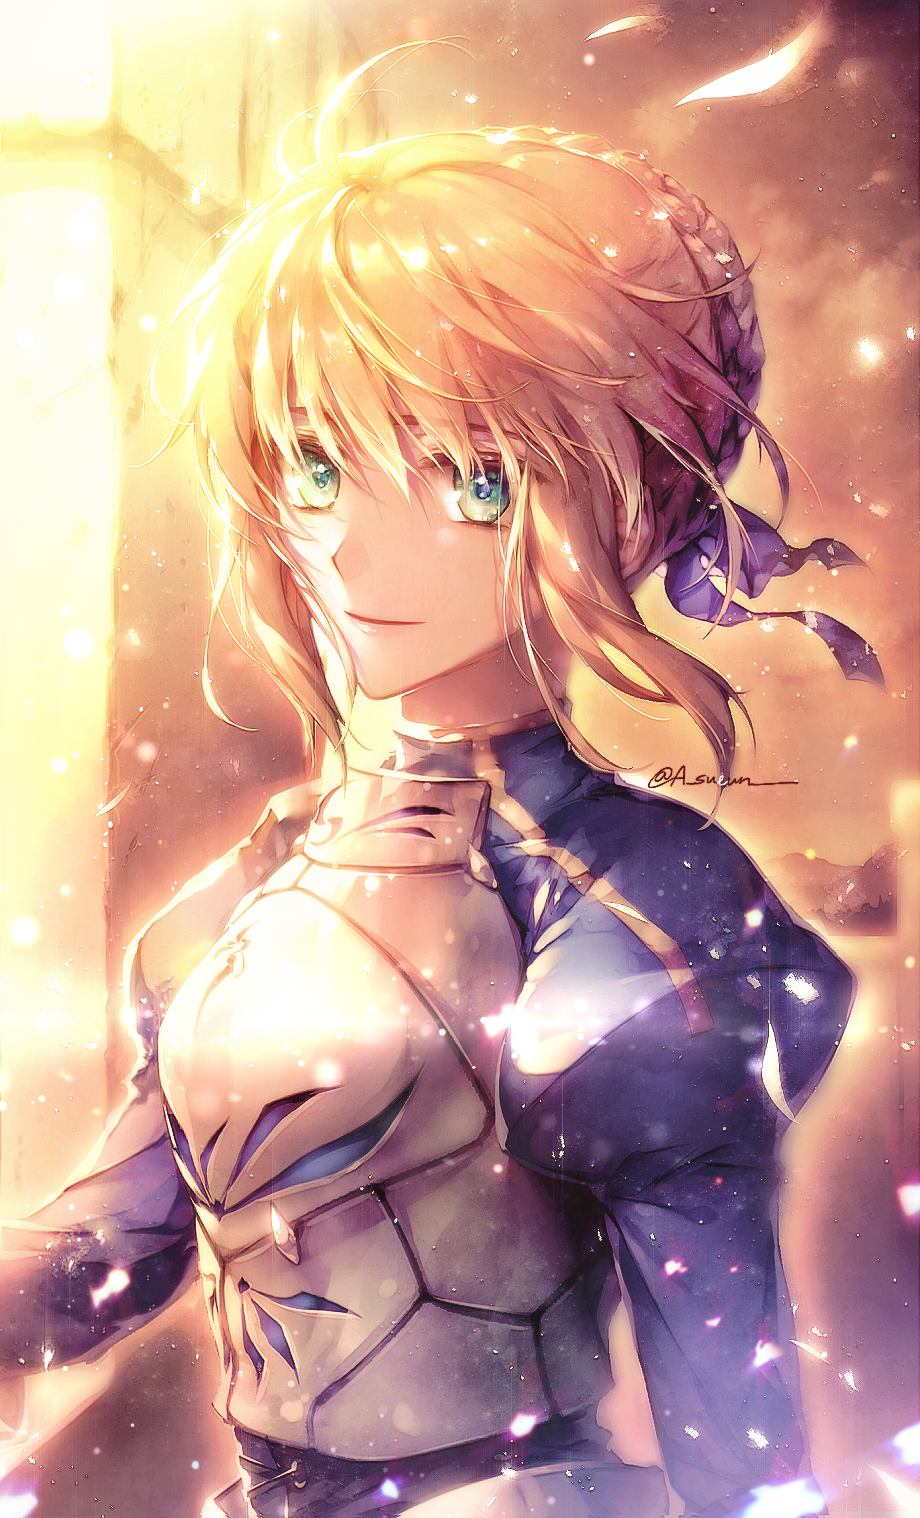 Anime 920x1518 Fate series Fate/Stay Night anime girls fan art 2D looking at viewer Saber green eyes armor blonde Artoria Pendragon